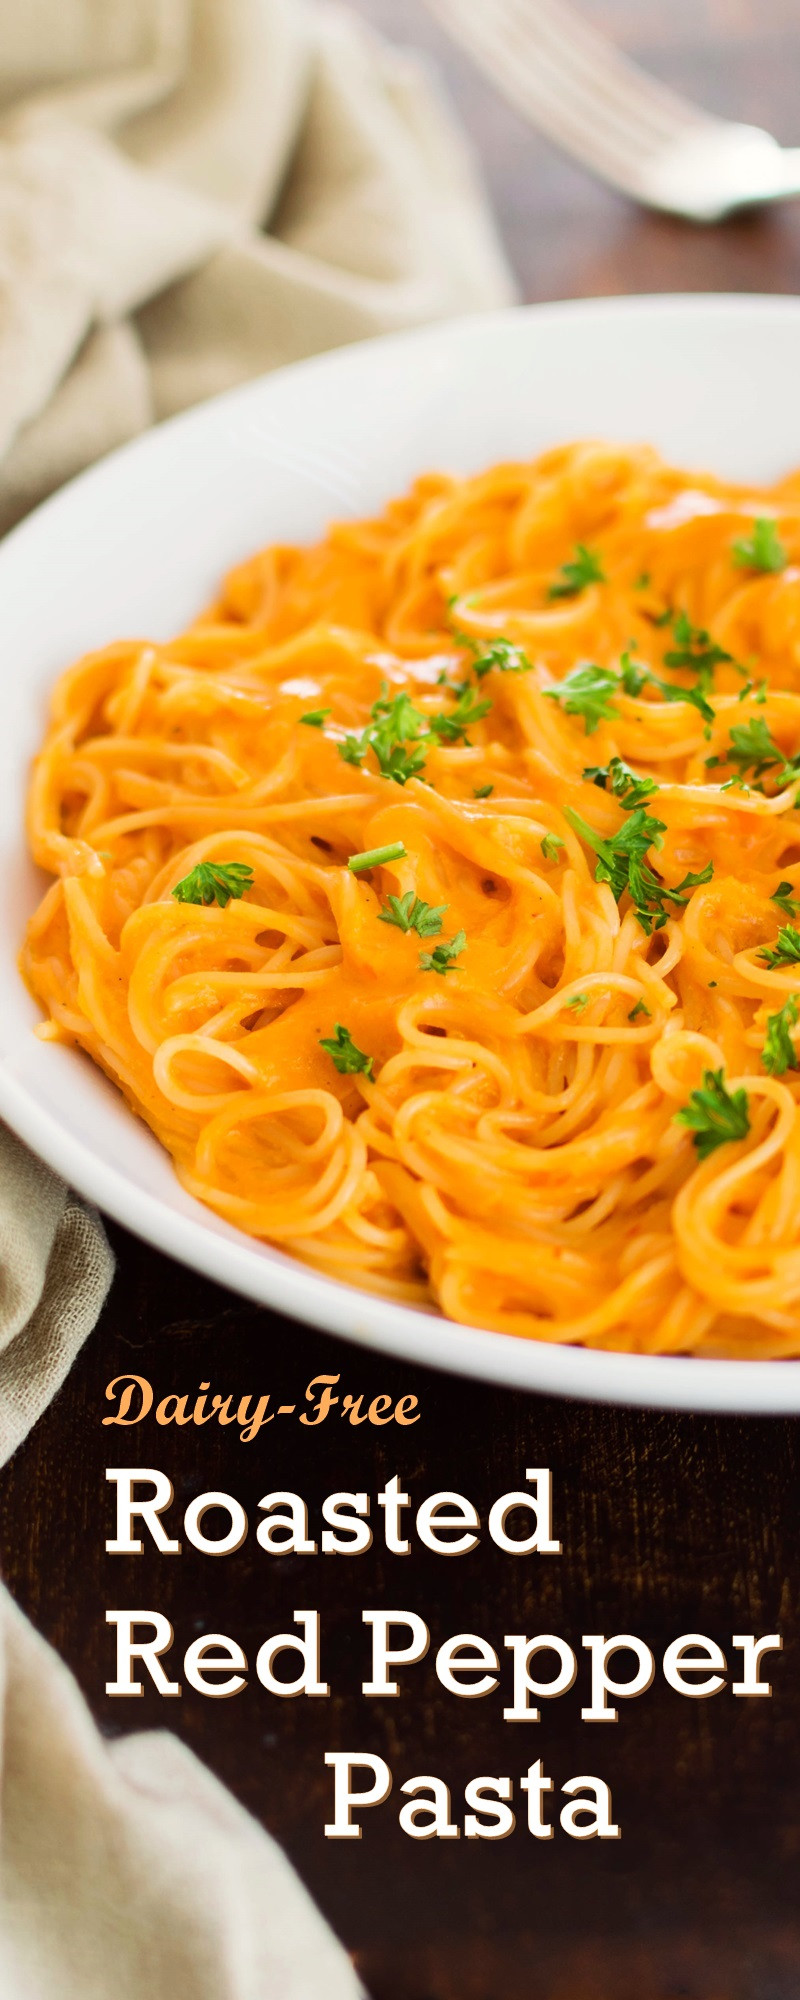 Dairy Free Pasta Recipes
 Roasted Red Pepper Pasta Recipe Creamy Spicy Easy and